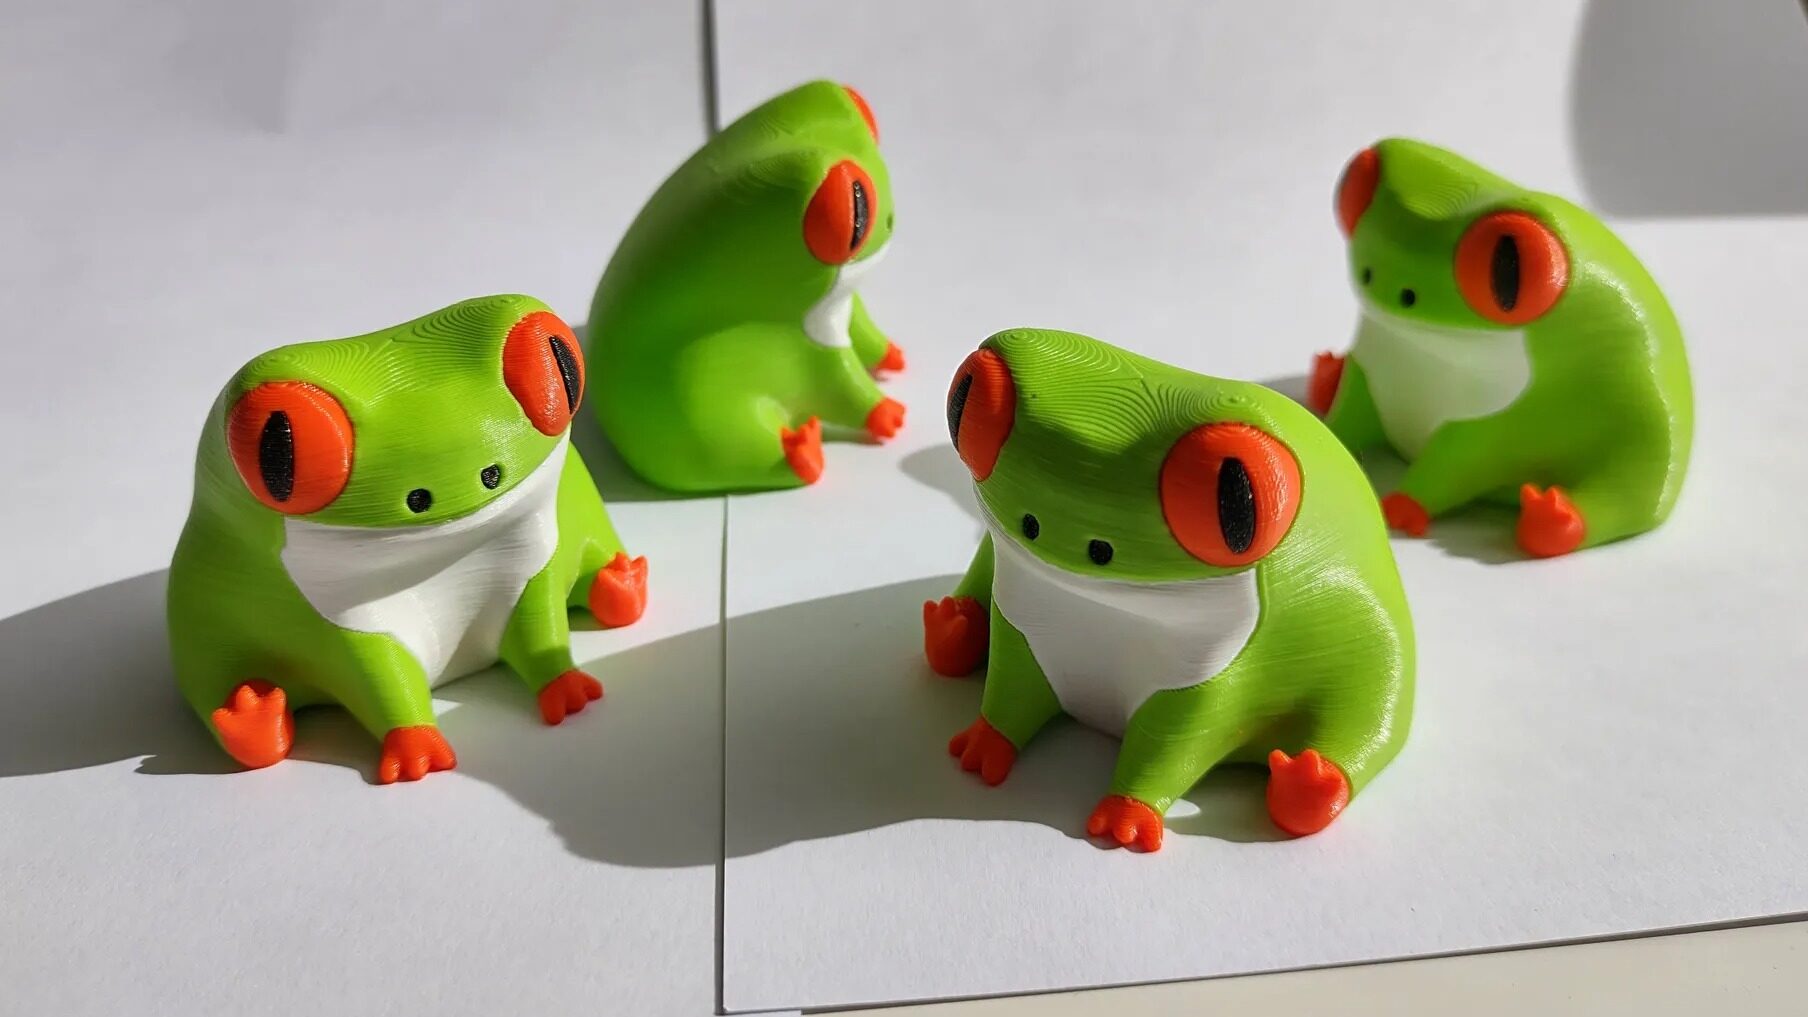 Test Paint Schemes on 3D Model STL Files with Color Minis